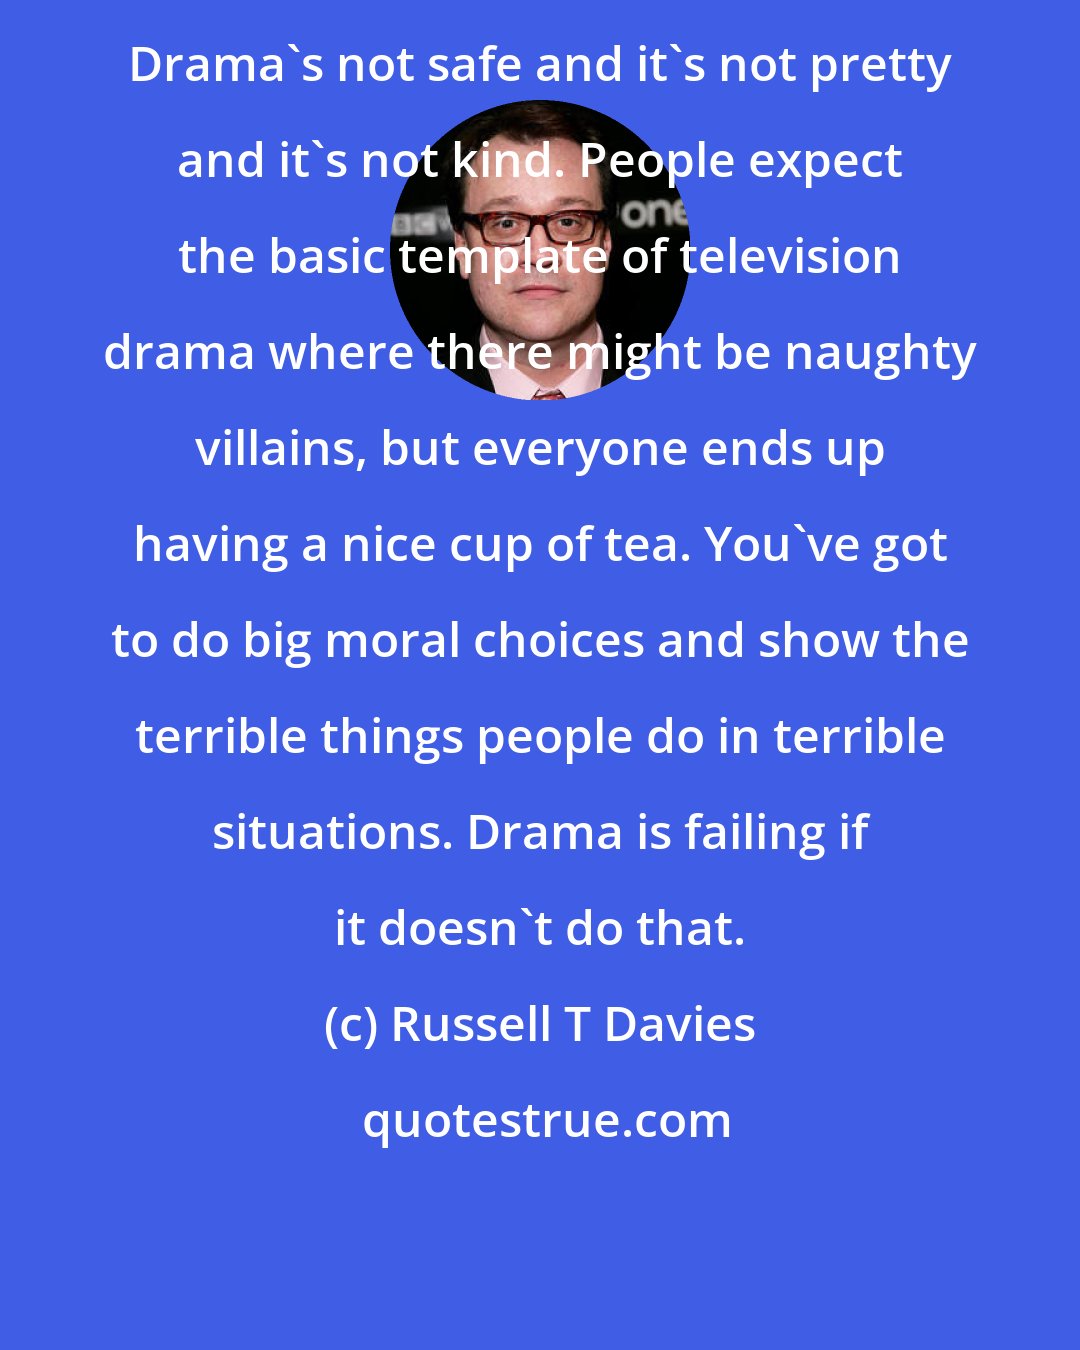 Russell T Davies: Drama's not safe and it's not pretty and it's not kind. People expect the basic template of television drama where there might be naughty villains, but everyone ends up having a nice cup of tea. You've got to do big moral choices and show the terrible things people do in terrible situations. Drama is failing if it doesn't do that.